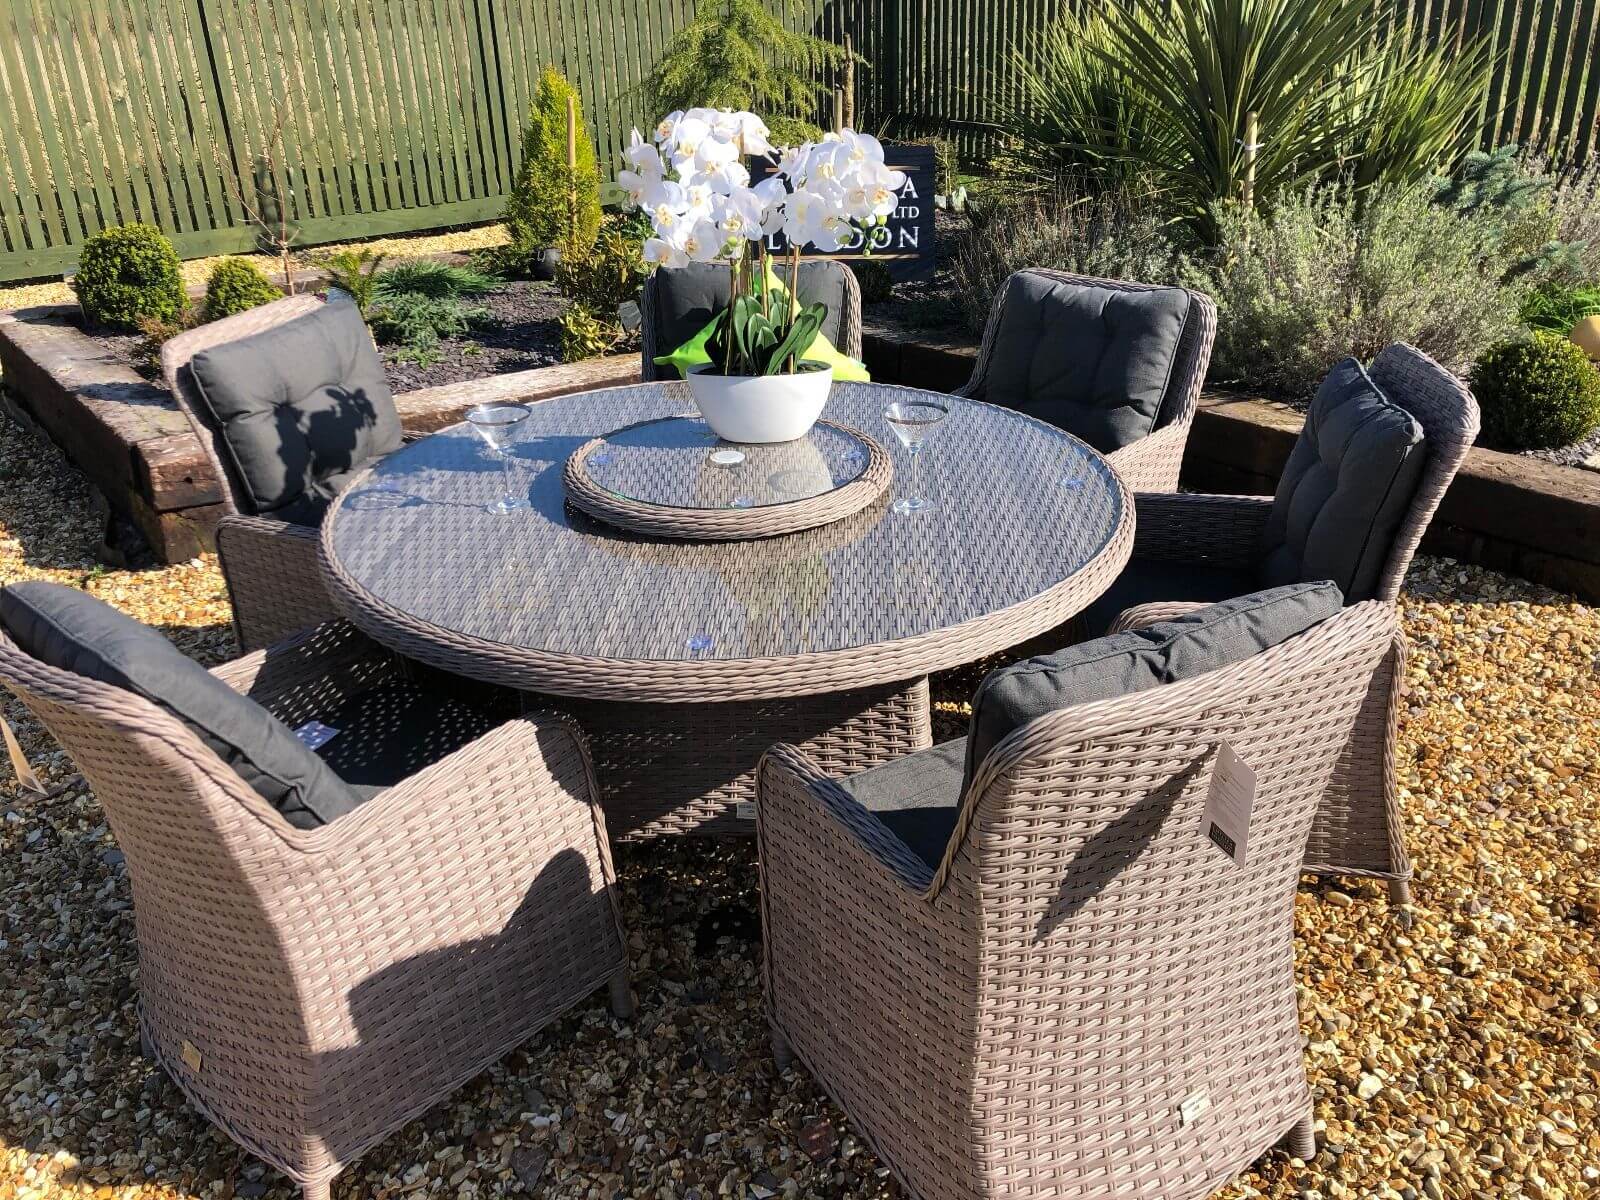 Premium Edition Round Rattan Dining Set With Reclining Chairs Chelsea Home And Leisure Ltd - Rattan Patio Dining Set Round